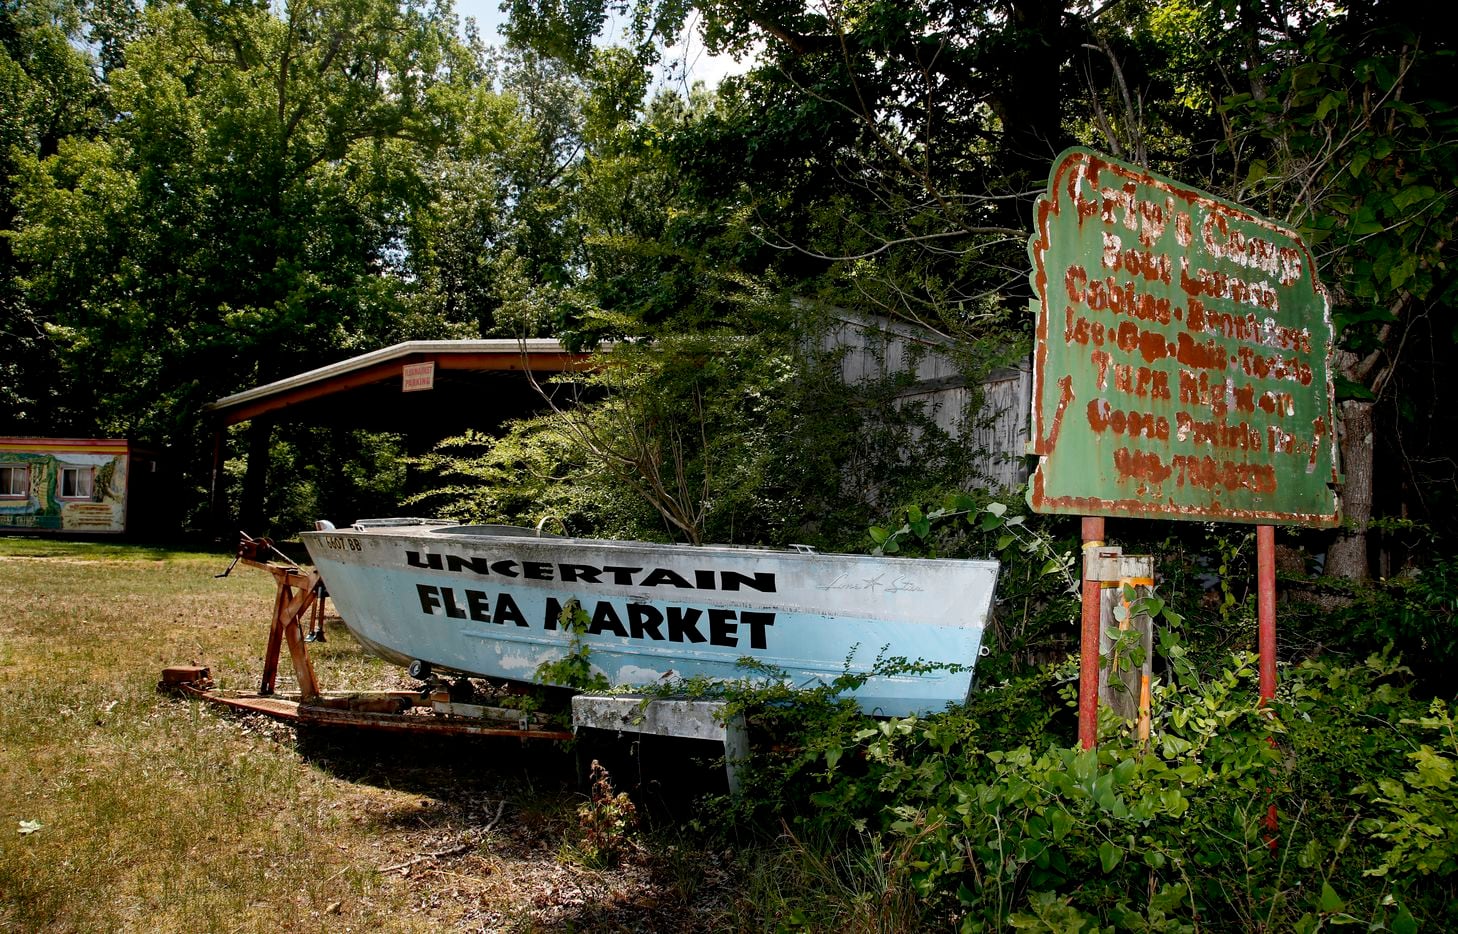 A faded sign advertising Crip's Camp stands beside an old boat advertising a flea market...